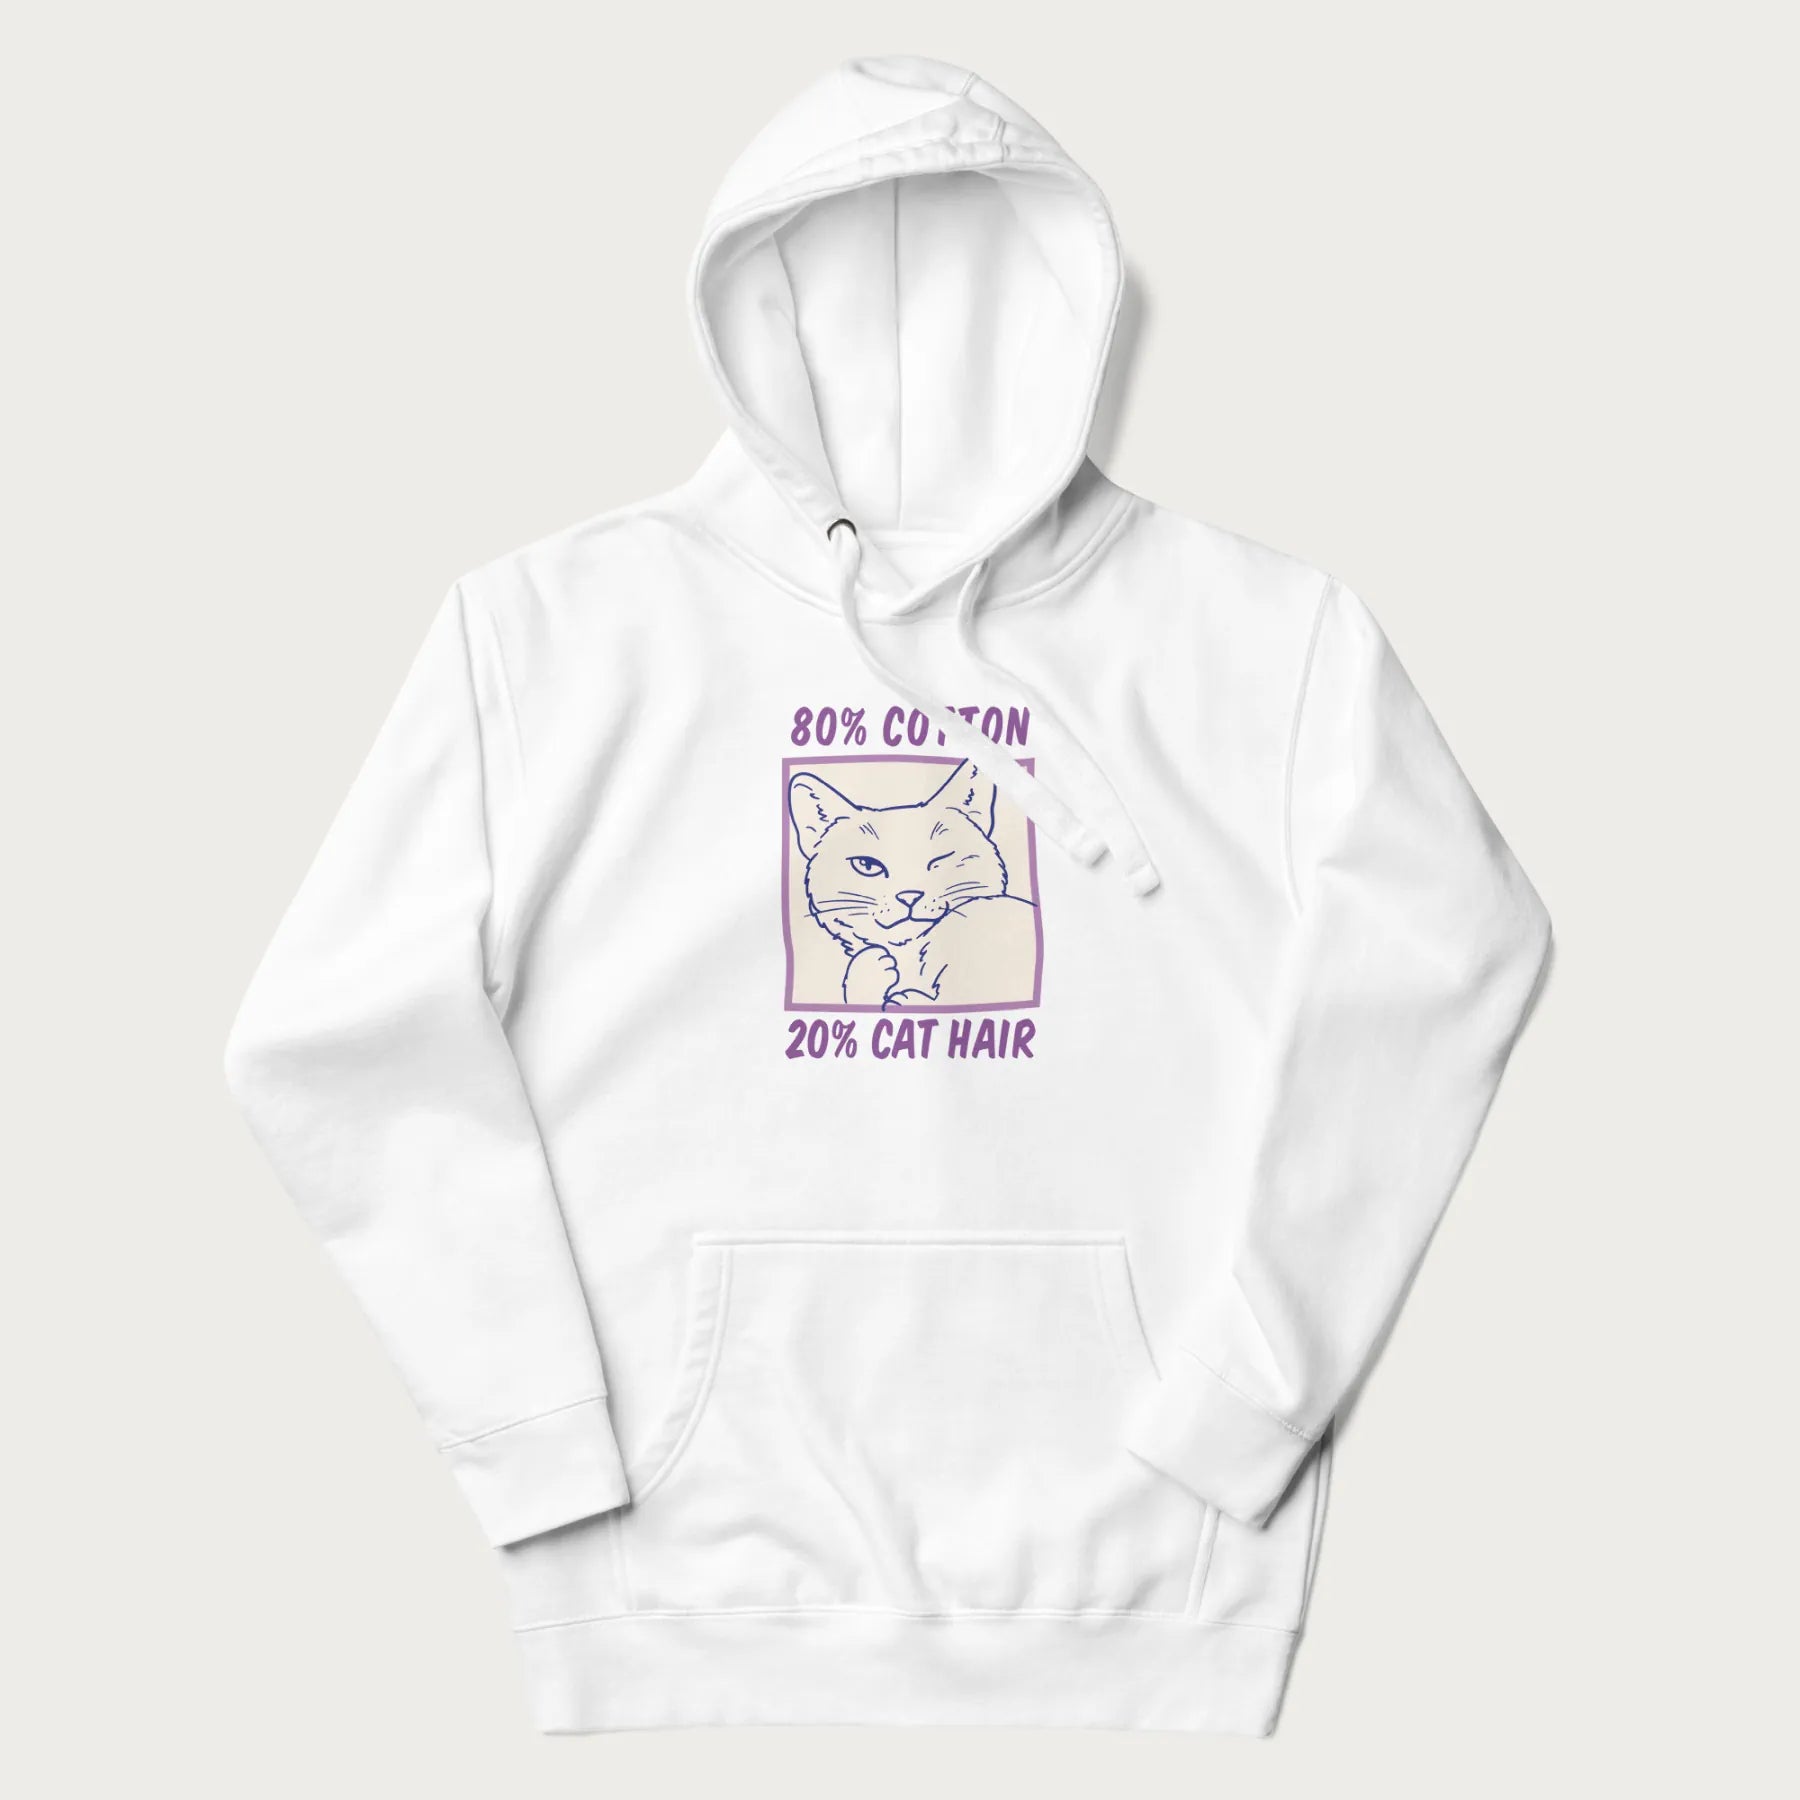 White hoodie with graphic of a winking cat with the text "80% cotton 20% cat hair".